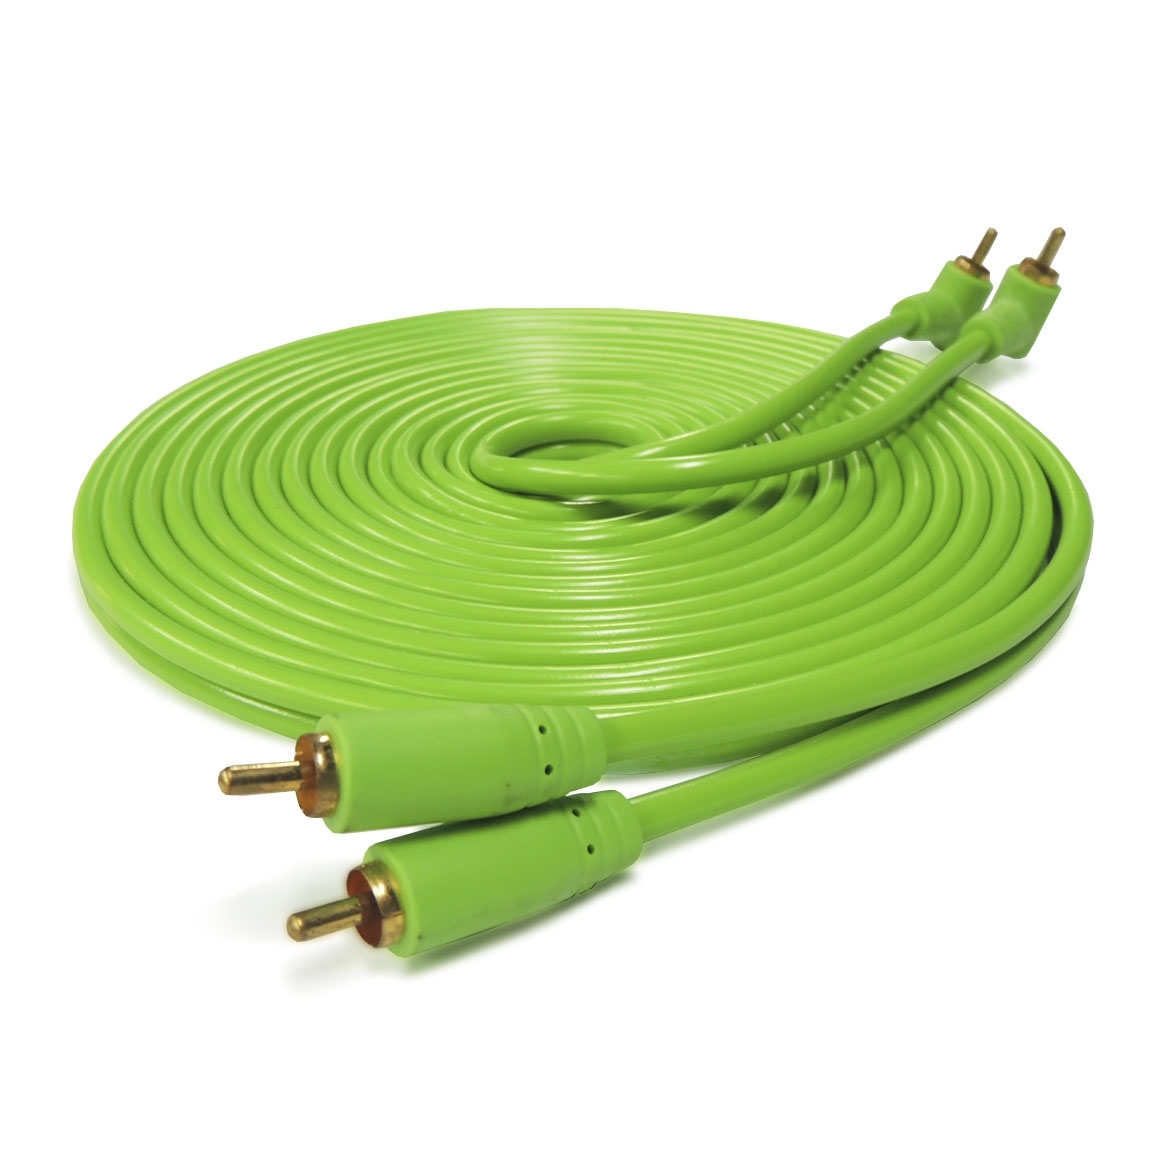 CABO RCA 5 MTS TECHNOISE SERIES 100P 5 MM CONECTOR PVC VERDE PCT 10 UNIDADES TECHNOISE